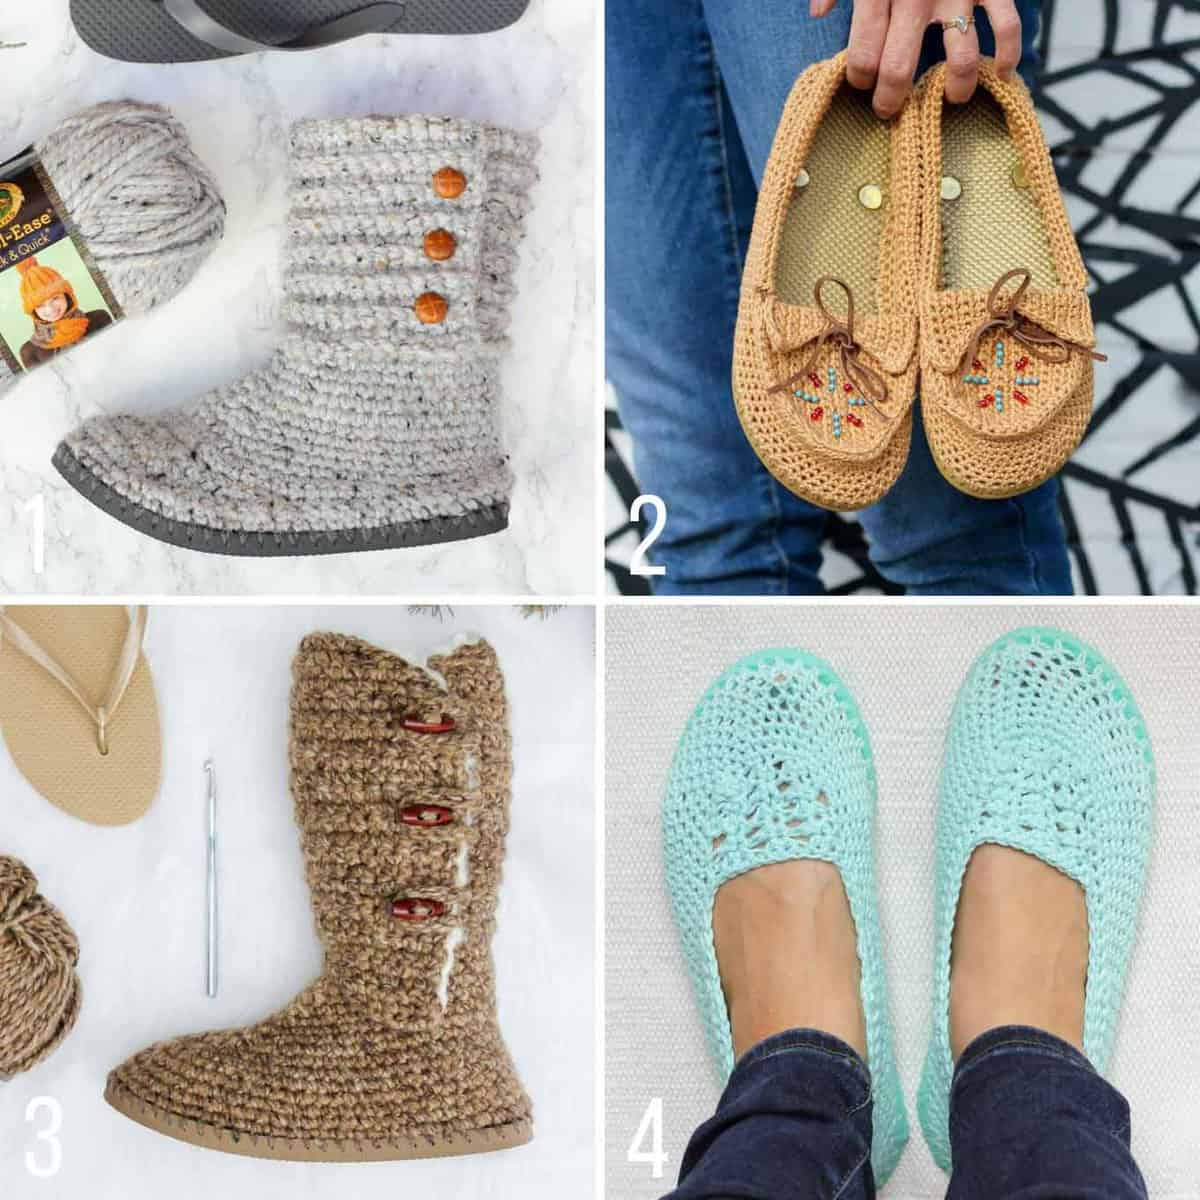 Free crochet shoe patterns using flip flops from Make and Do Crew. Use flip flops to crochet your own sandals, moccasins, boots, slippers and shoes!